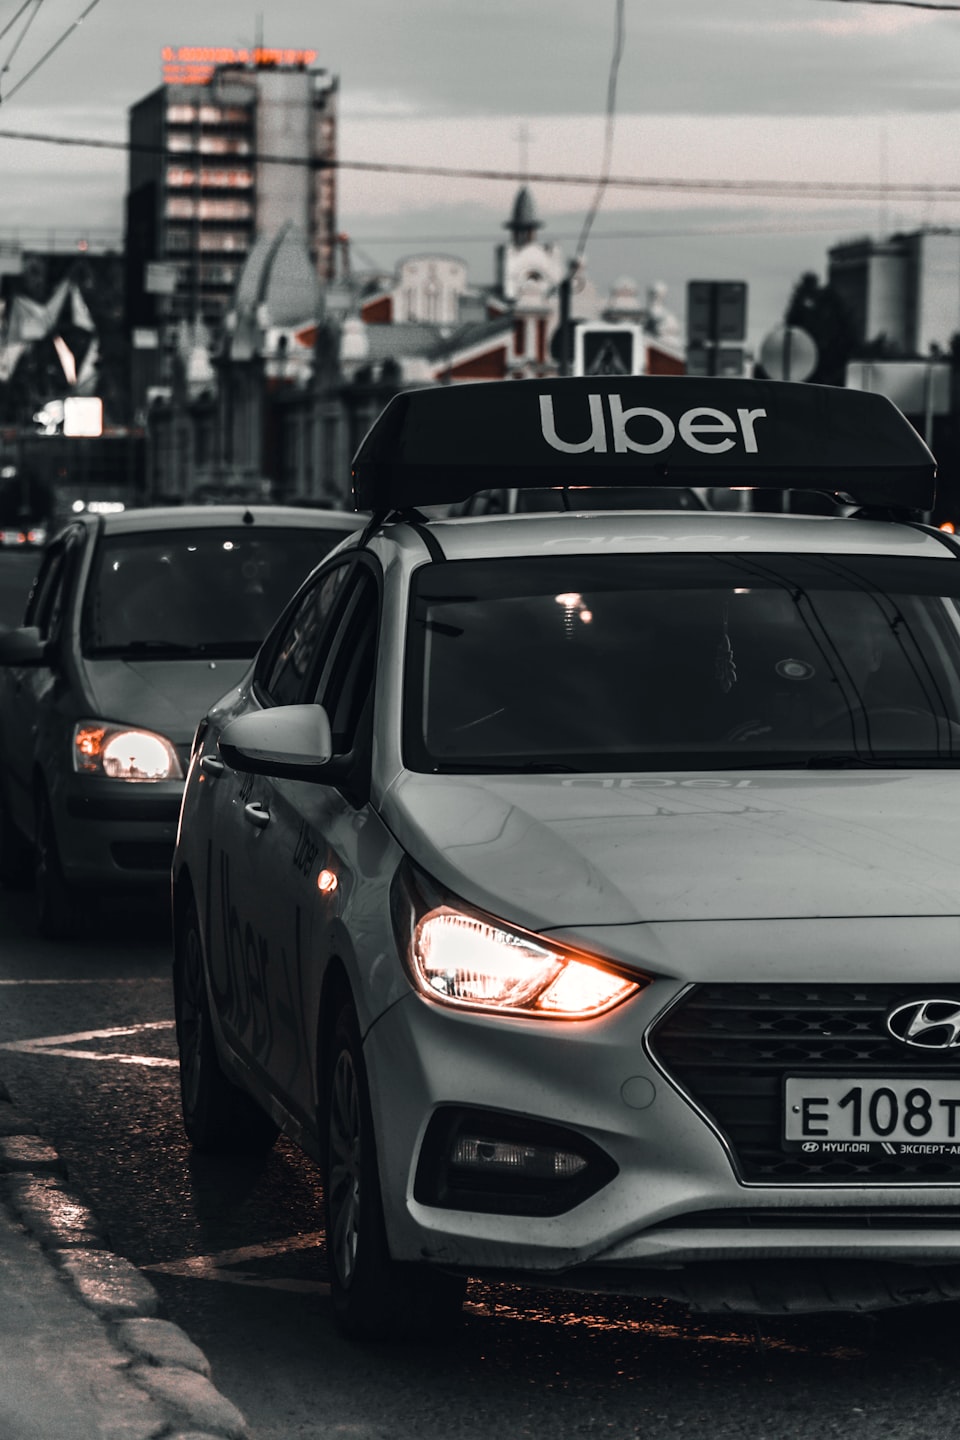 Uber is (still) ripping off drivers.